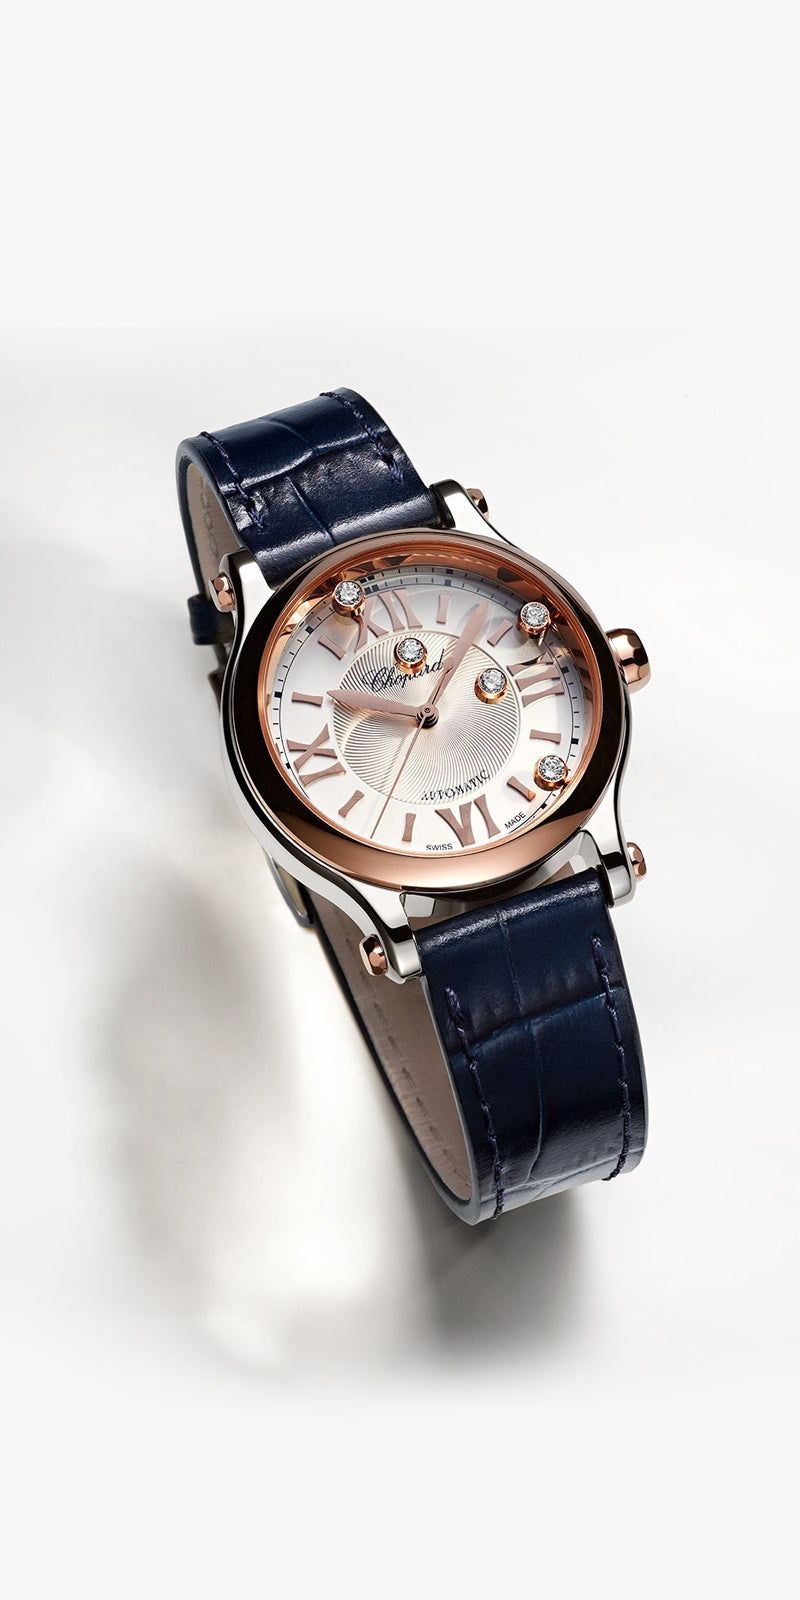 Chopard watch with blue leather band